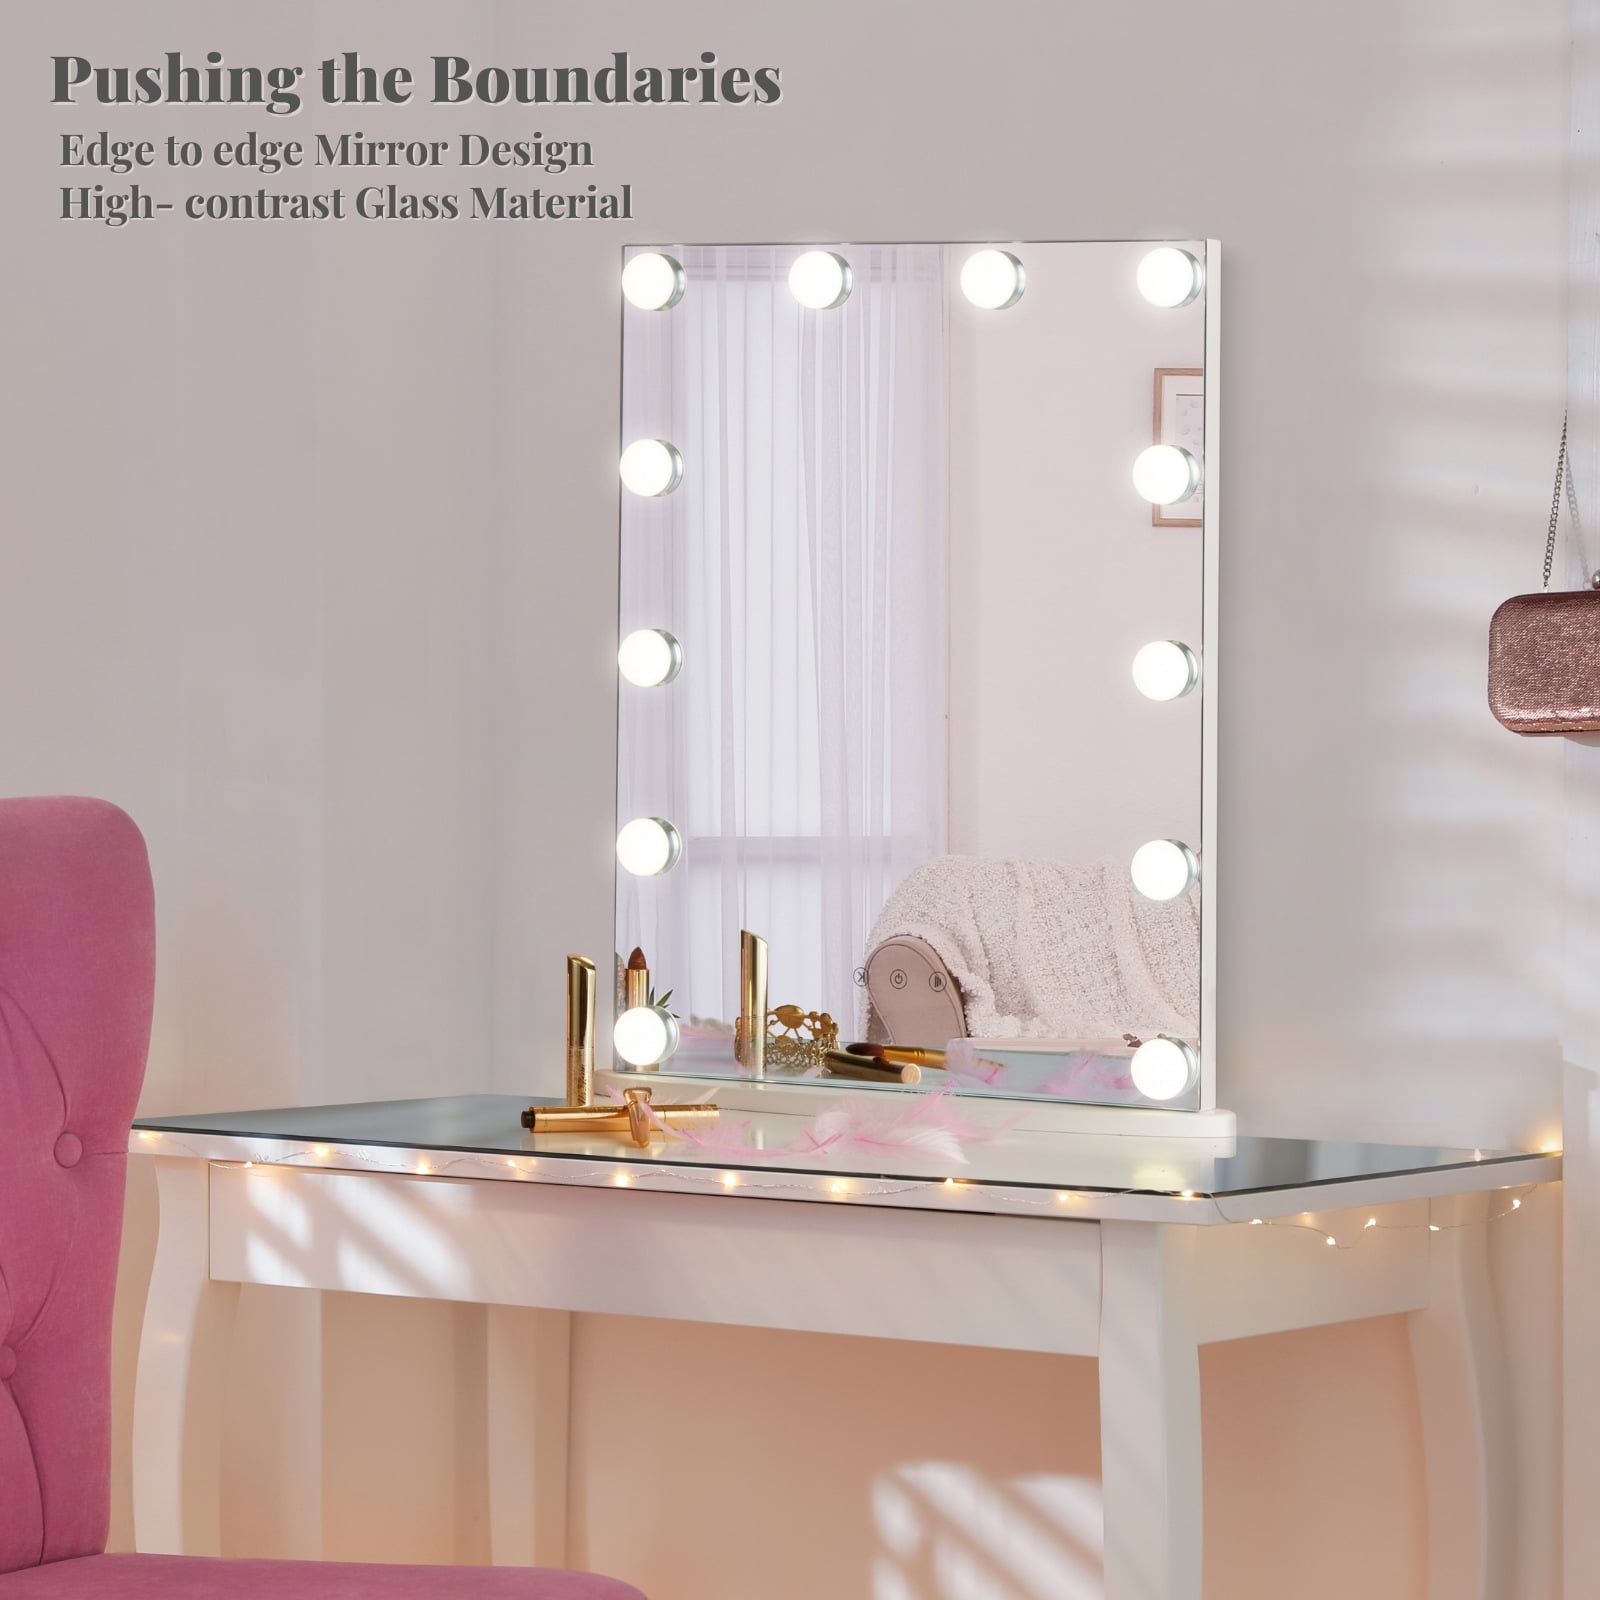 Touch Control Day/Warm Light LUXFURNI Hollywood Tabletop Makeup Mirror w/USB-powered Dimmable Light 